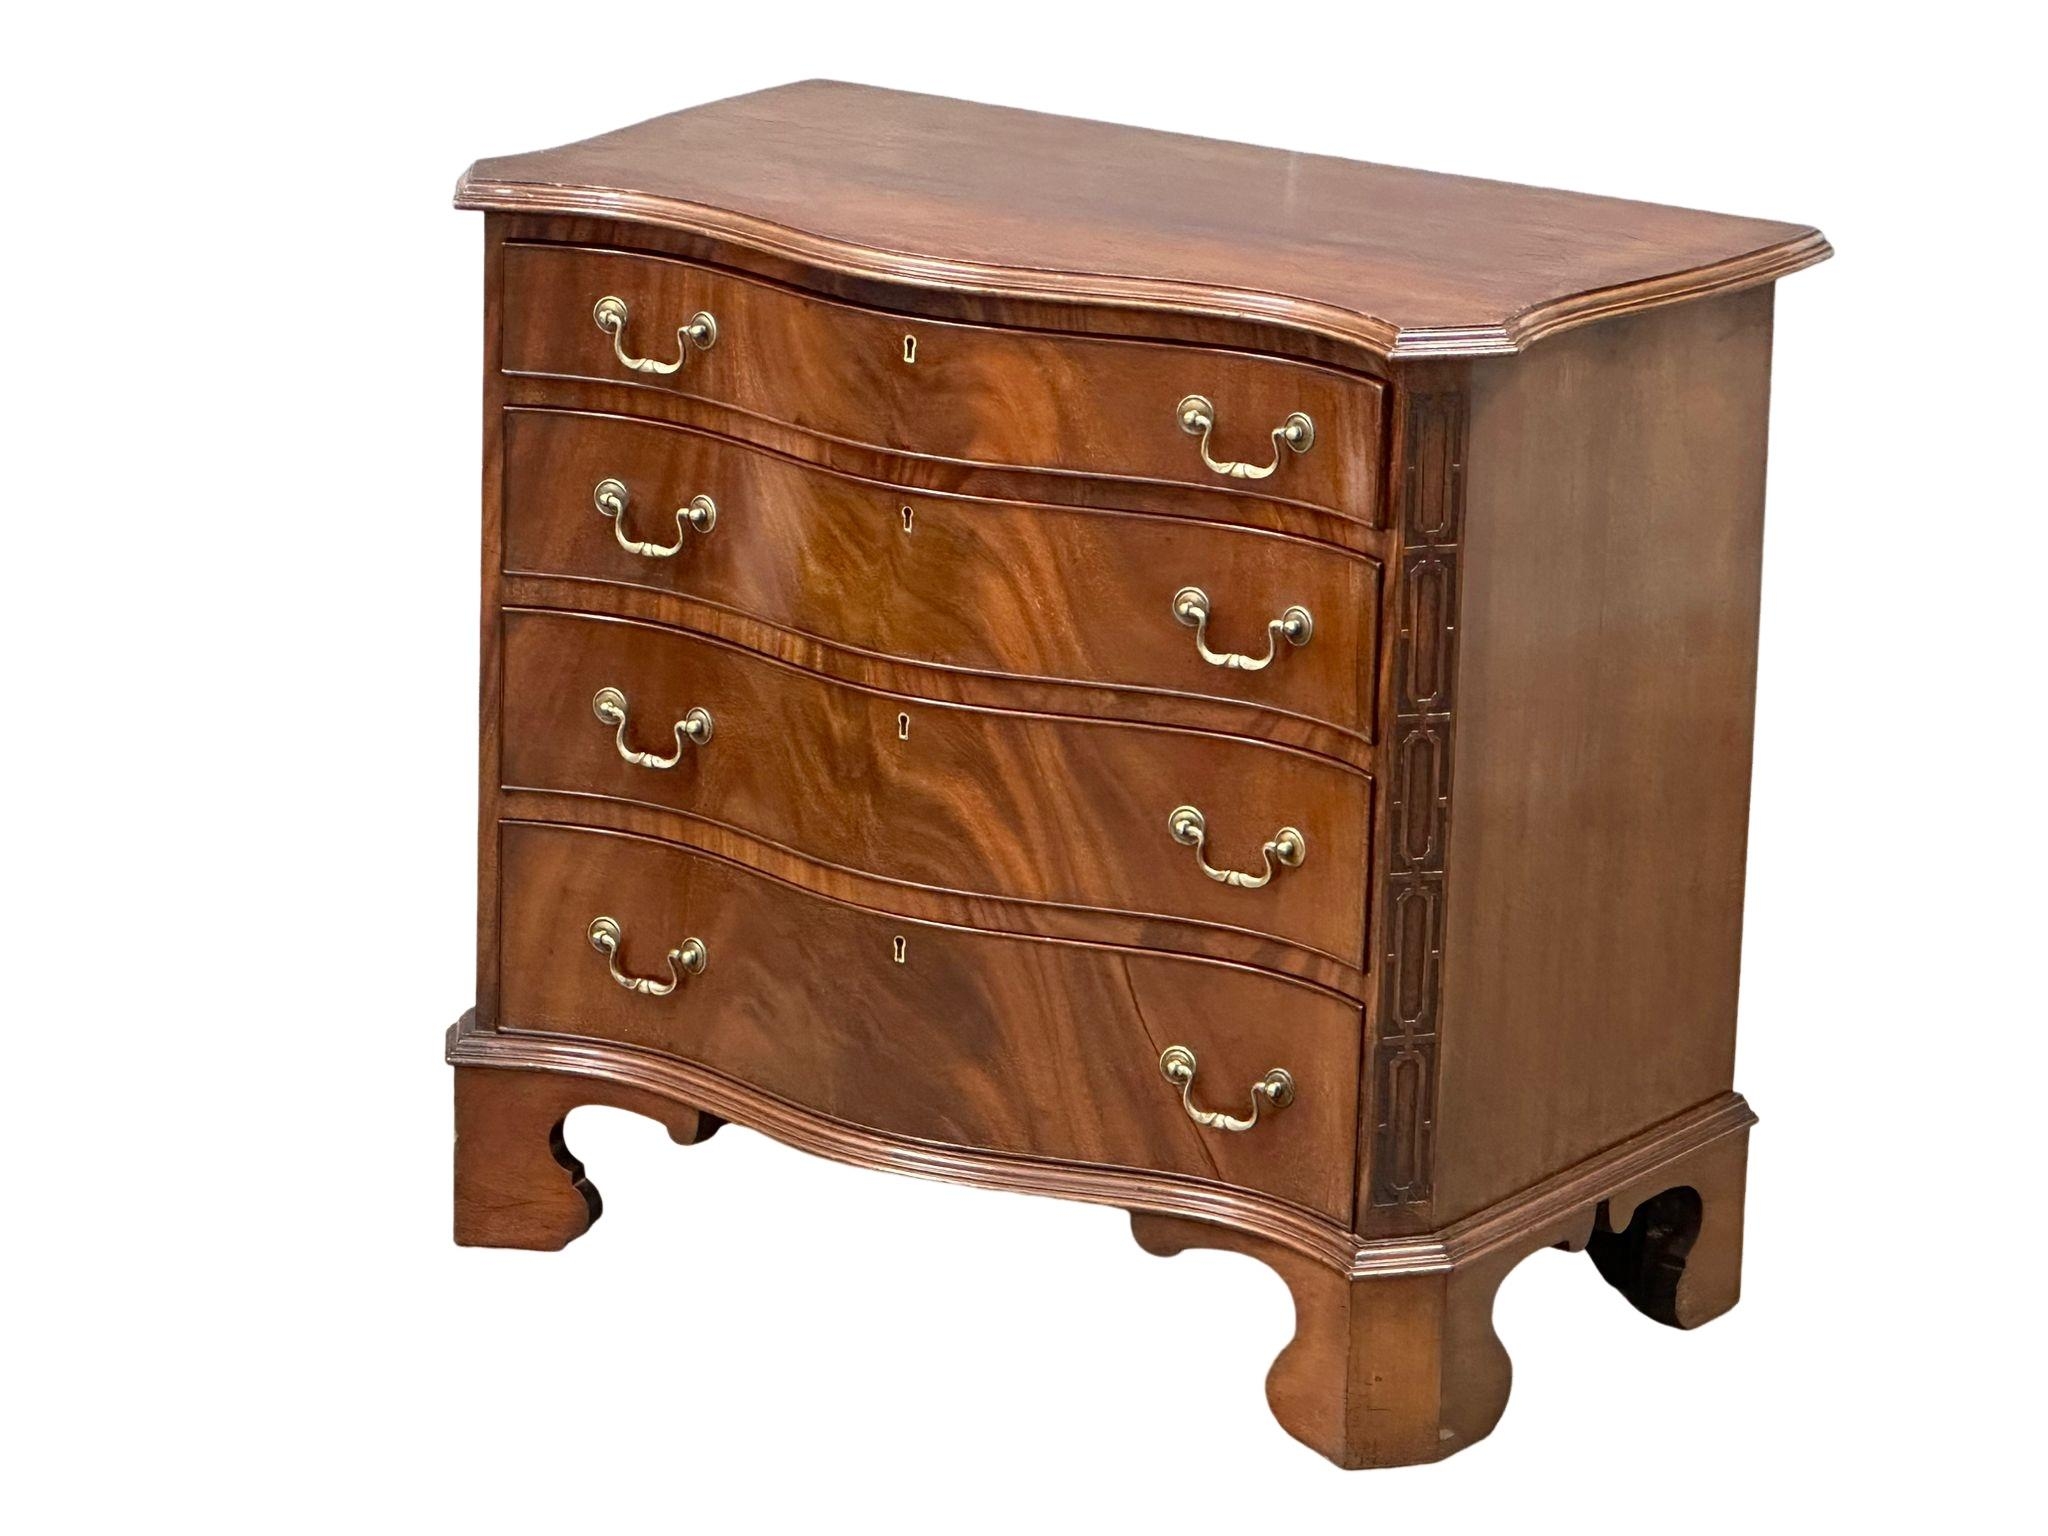 A good quality late 19th century Chippendale Revival mahogany serpentine front chest of drawers. - Image 20 of 22